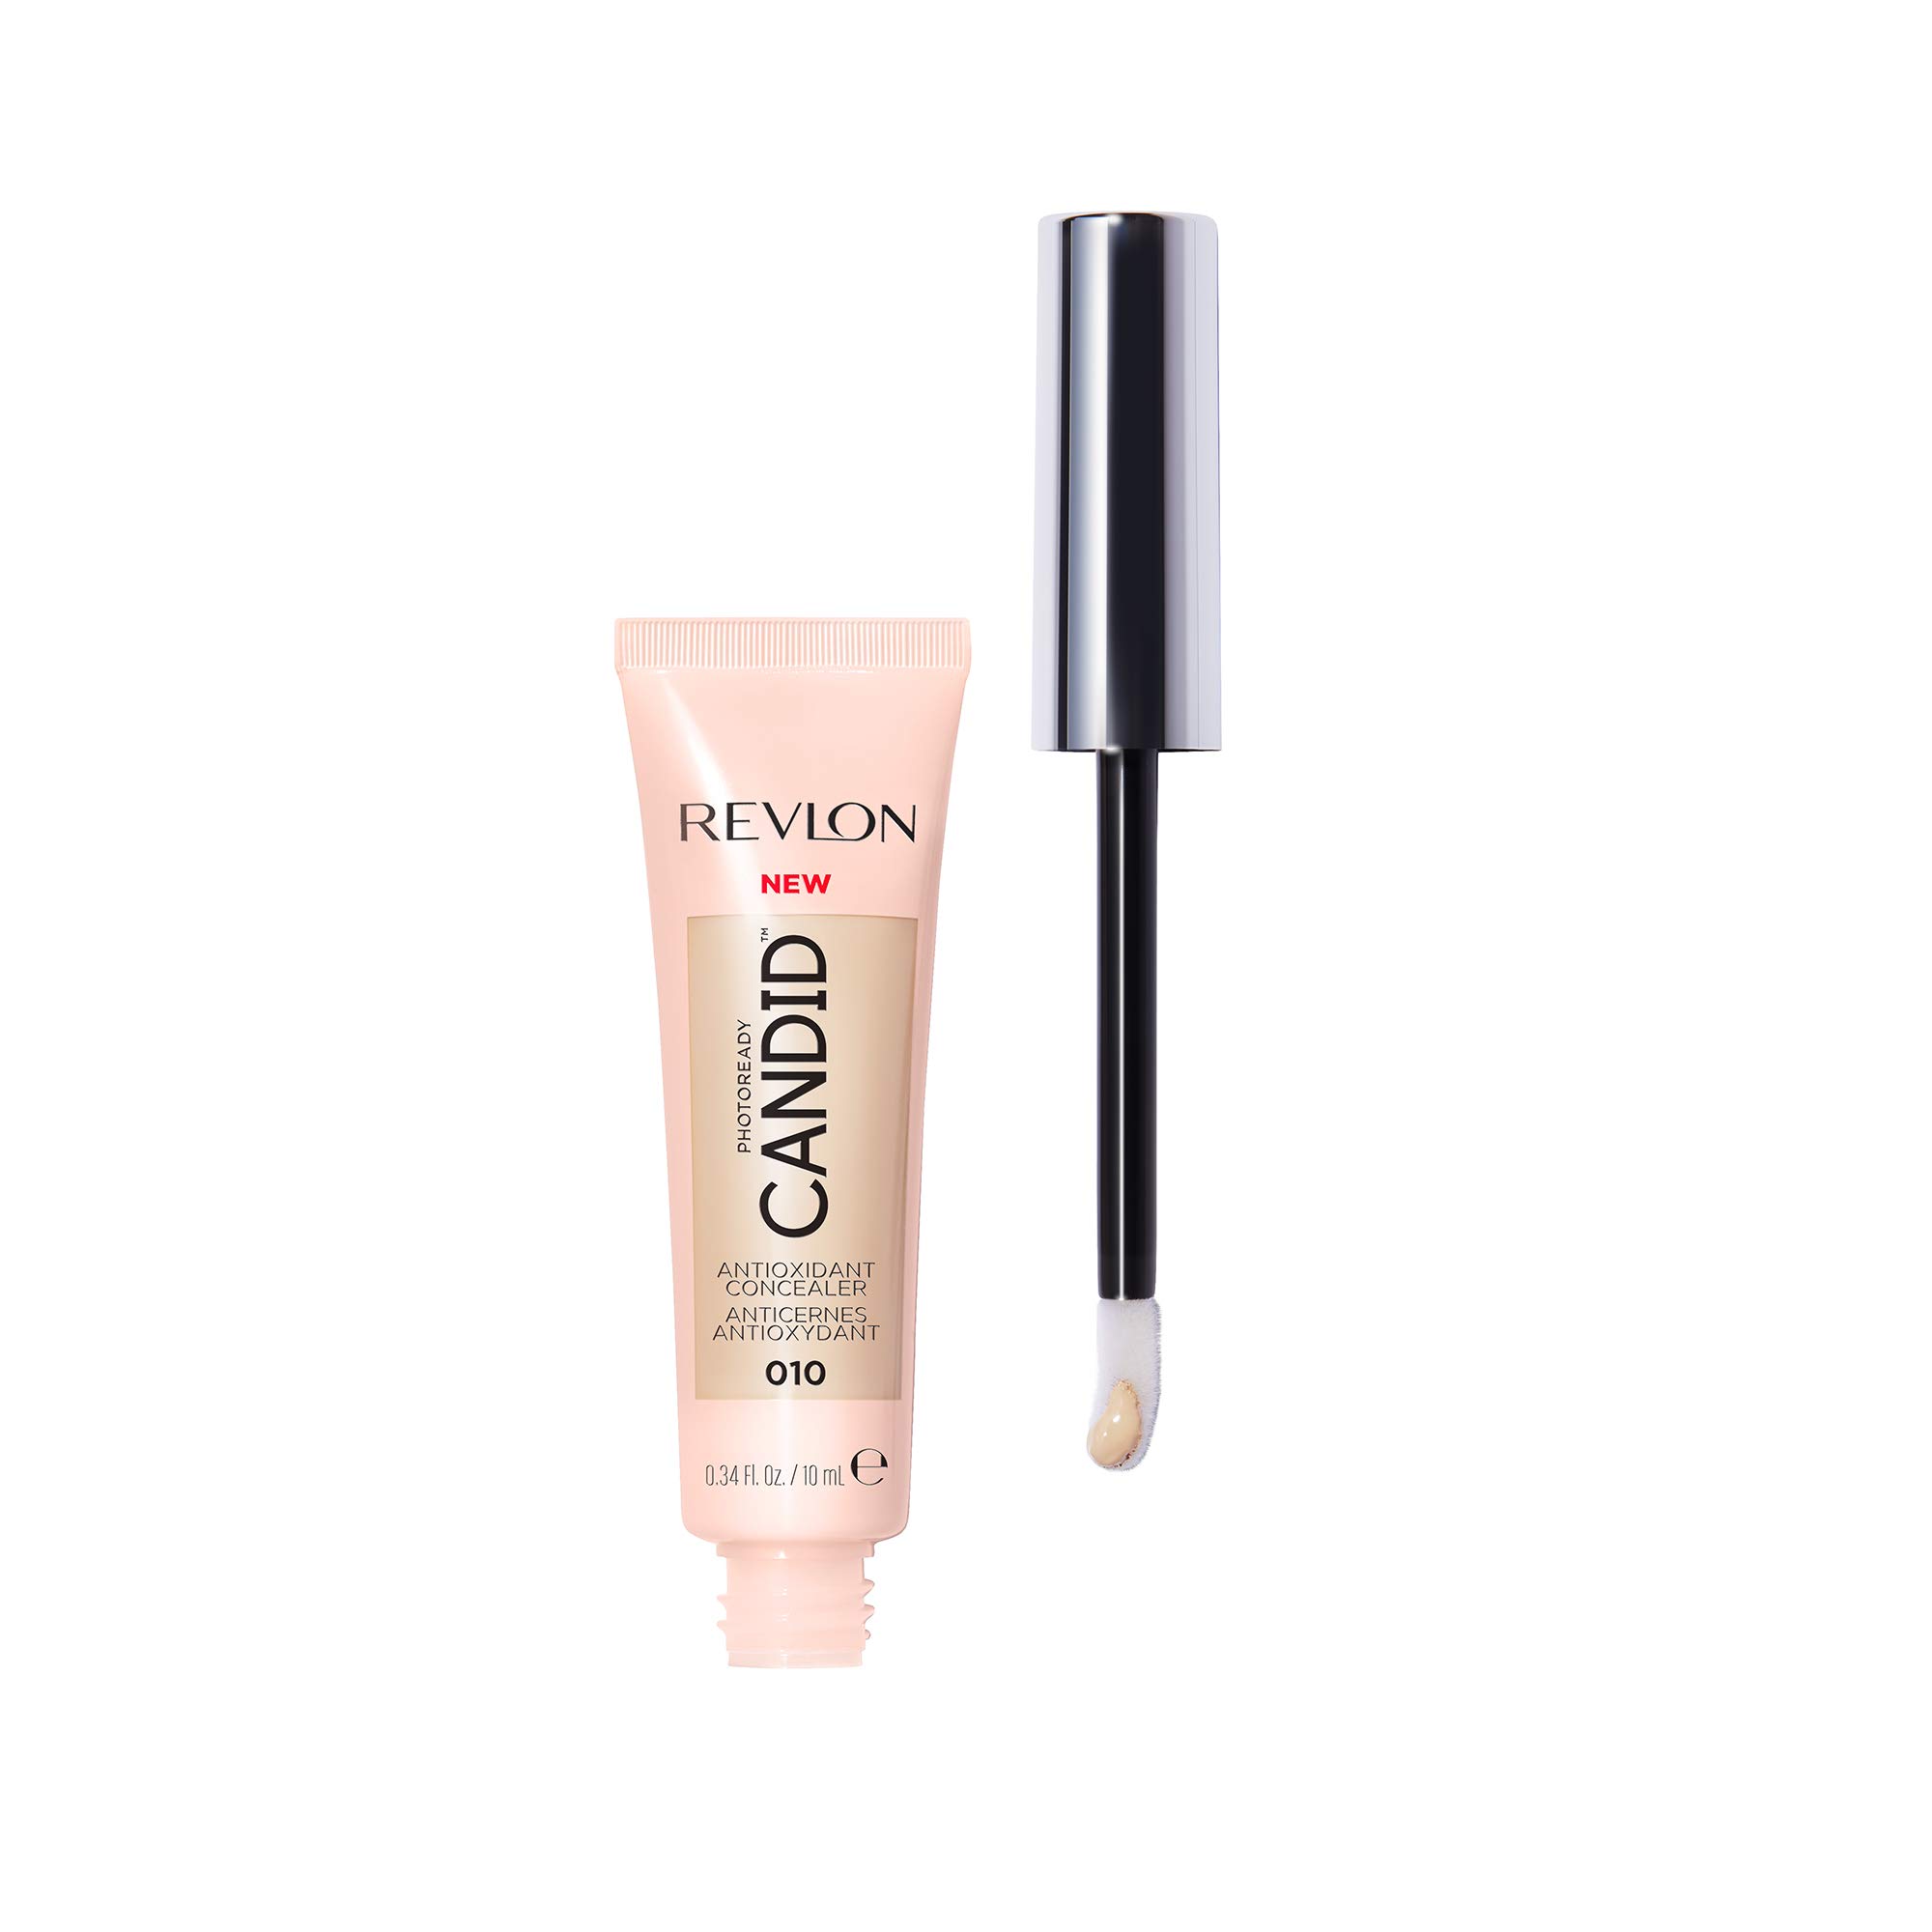 Revlon Concealer Stick, PhotoReady Candid Face Makeup with Anti-Pollution &Antioxidant Ingredients,Longwear Medium-Full Coverage Infused with Caffine,Natural Finish,Oil Free,010 Vanilla,0.34 Fl Oz